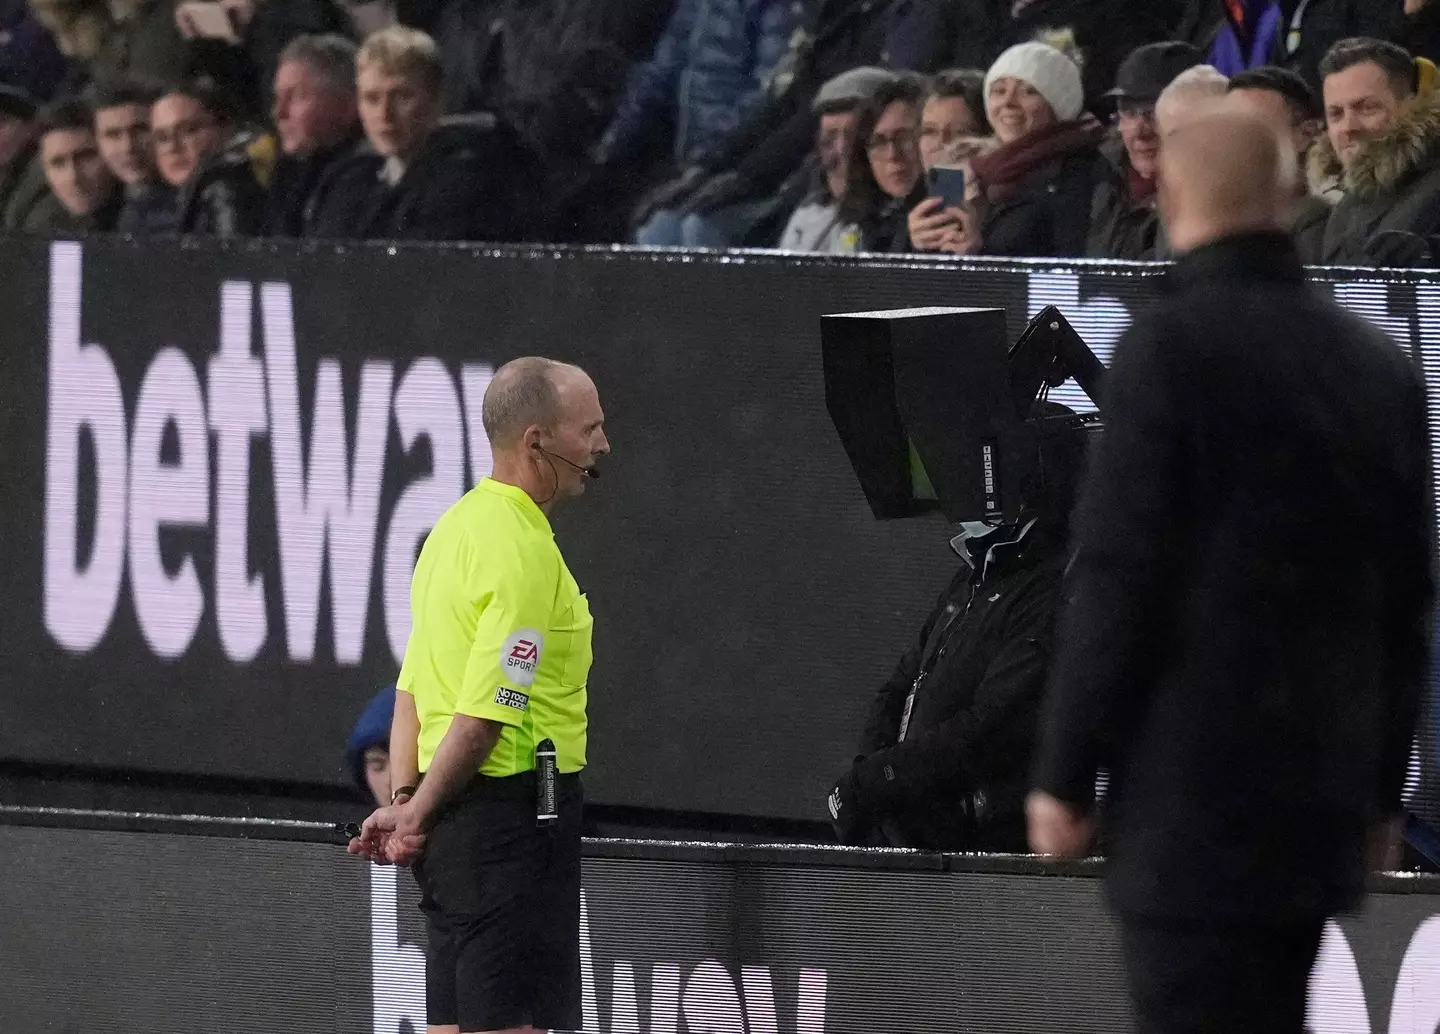 Dean could soon be sat in front of a VAR screen full time. Image: PA Images